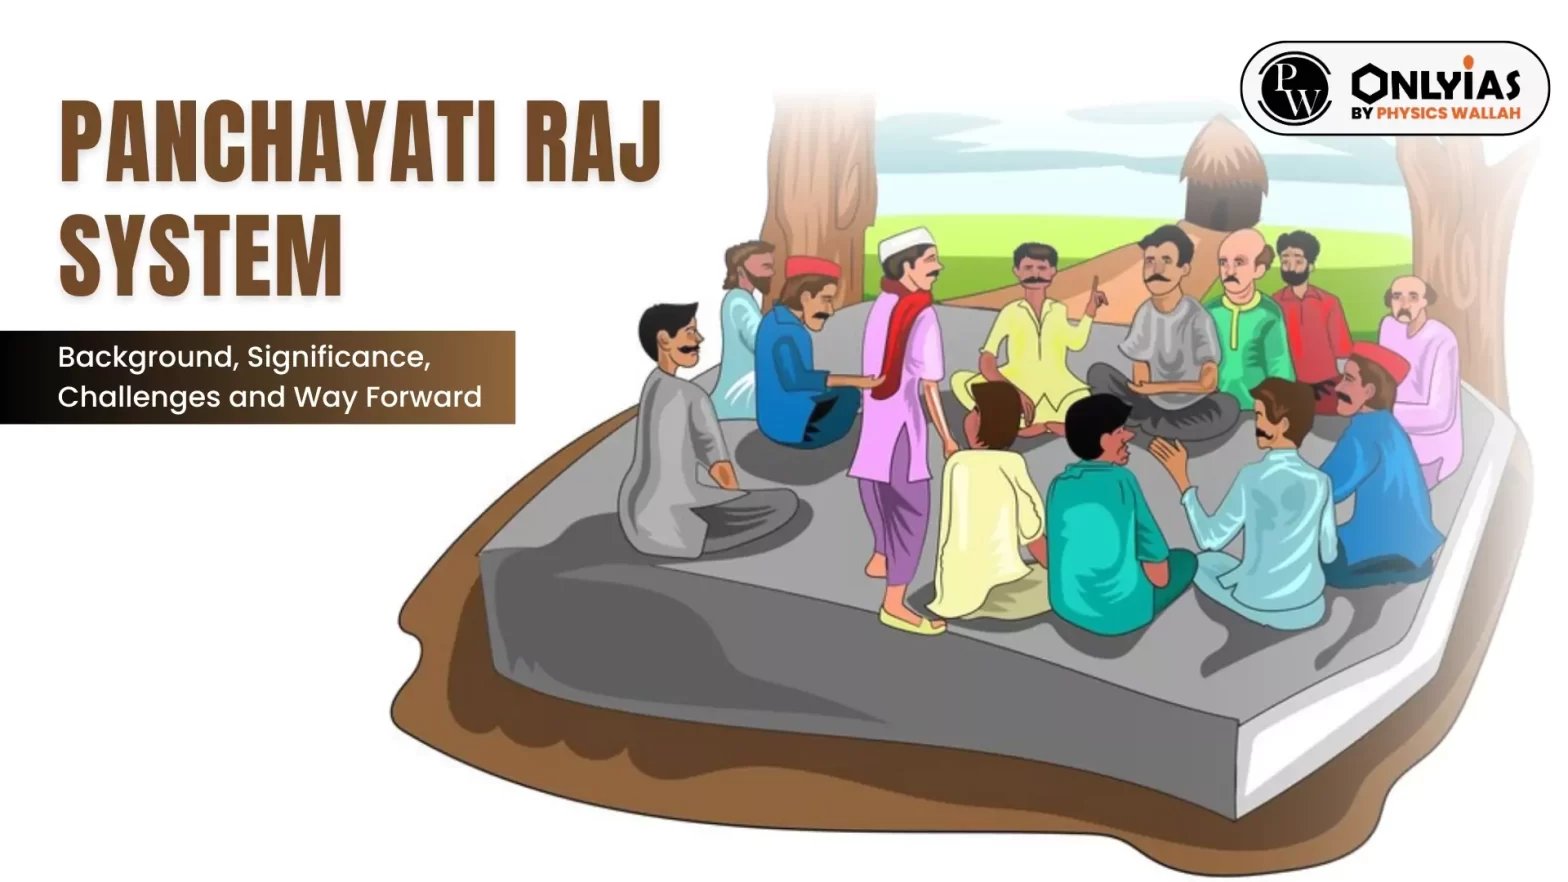 Panchayati Raj System: Background, Significance, Challenges and Way Forward